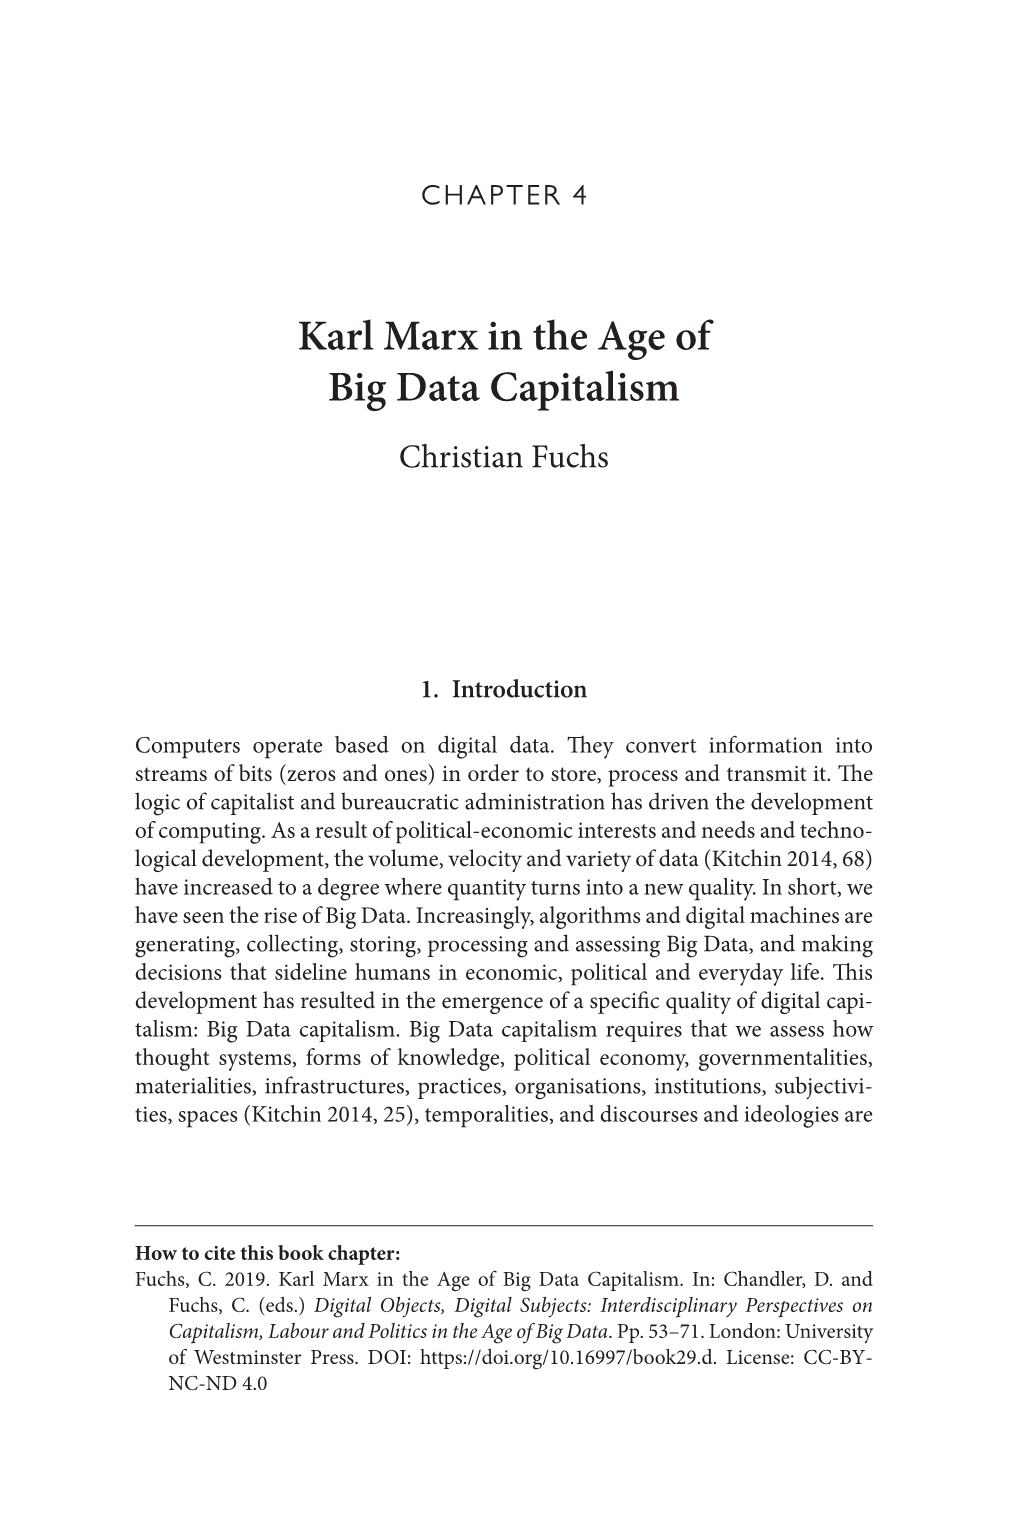 Karl Marx in the Age of Big Data Capitalism.­ In: Chandler, D